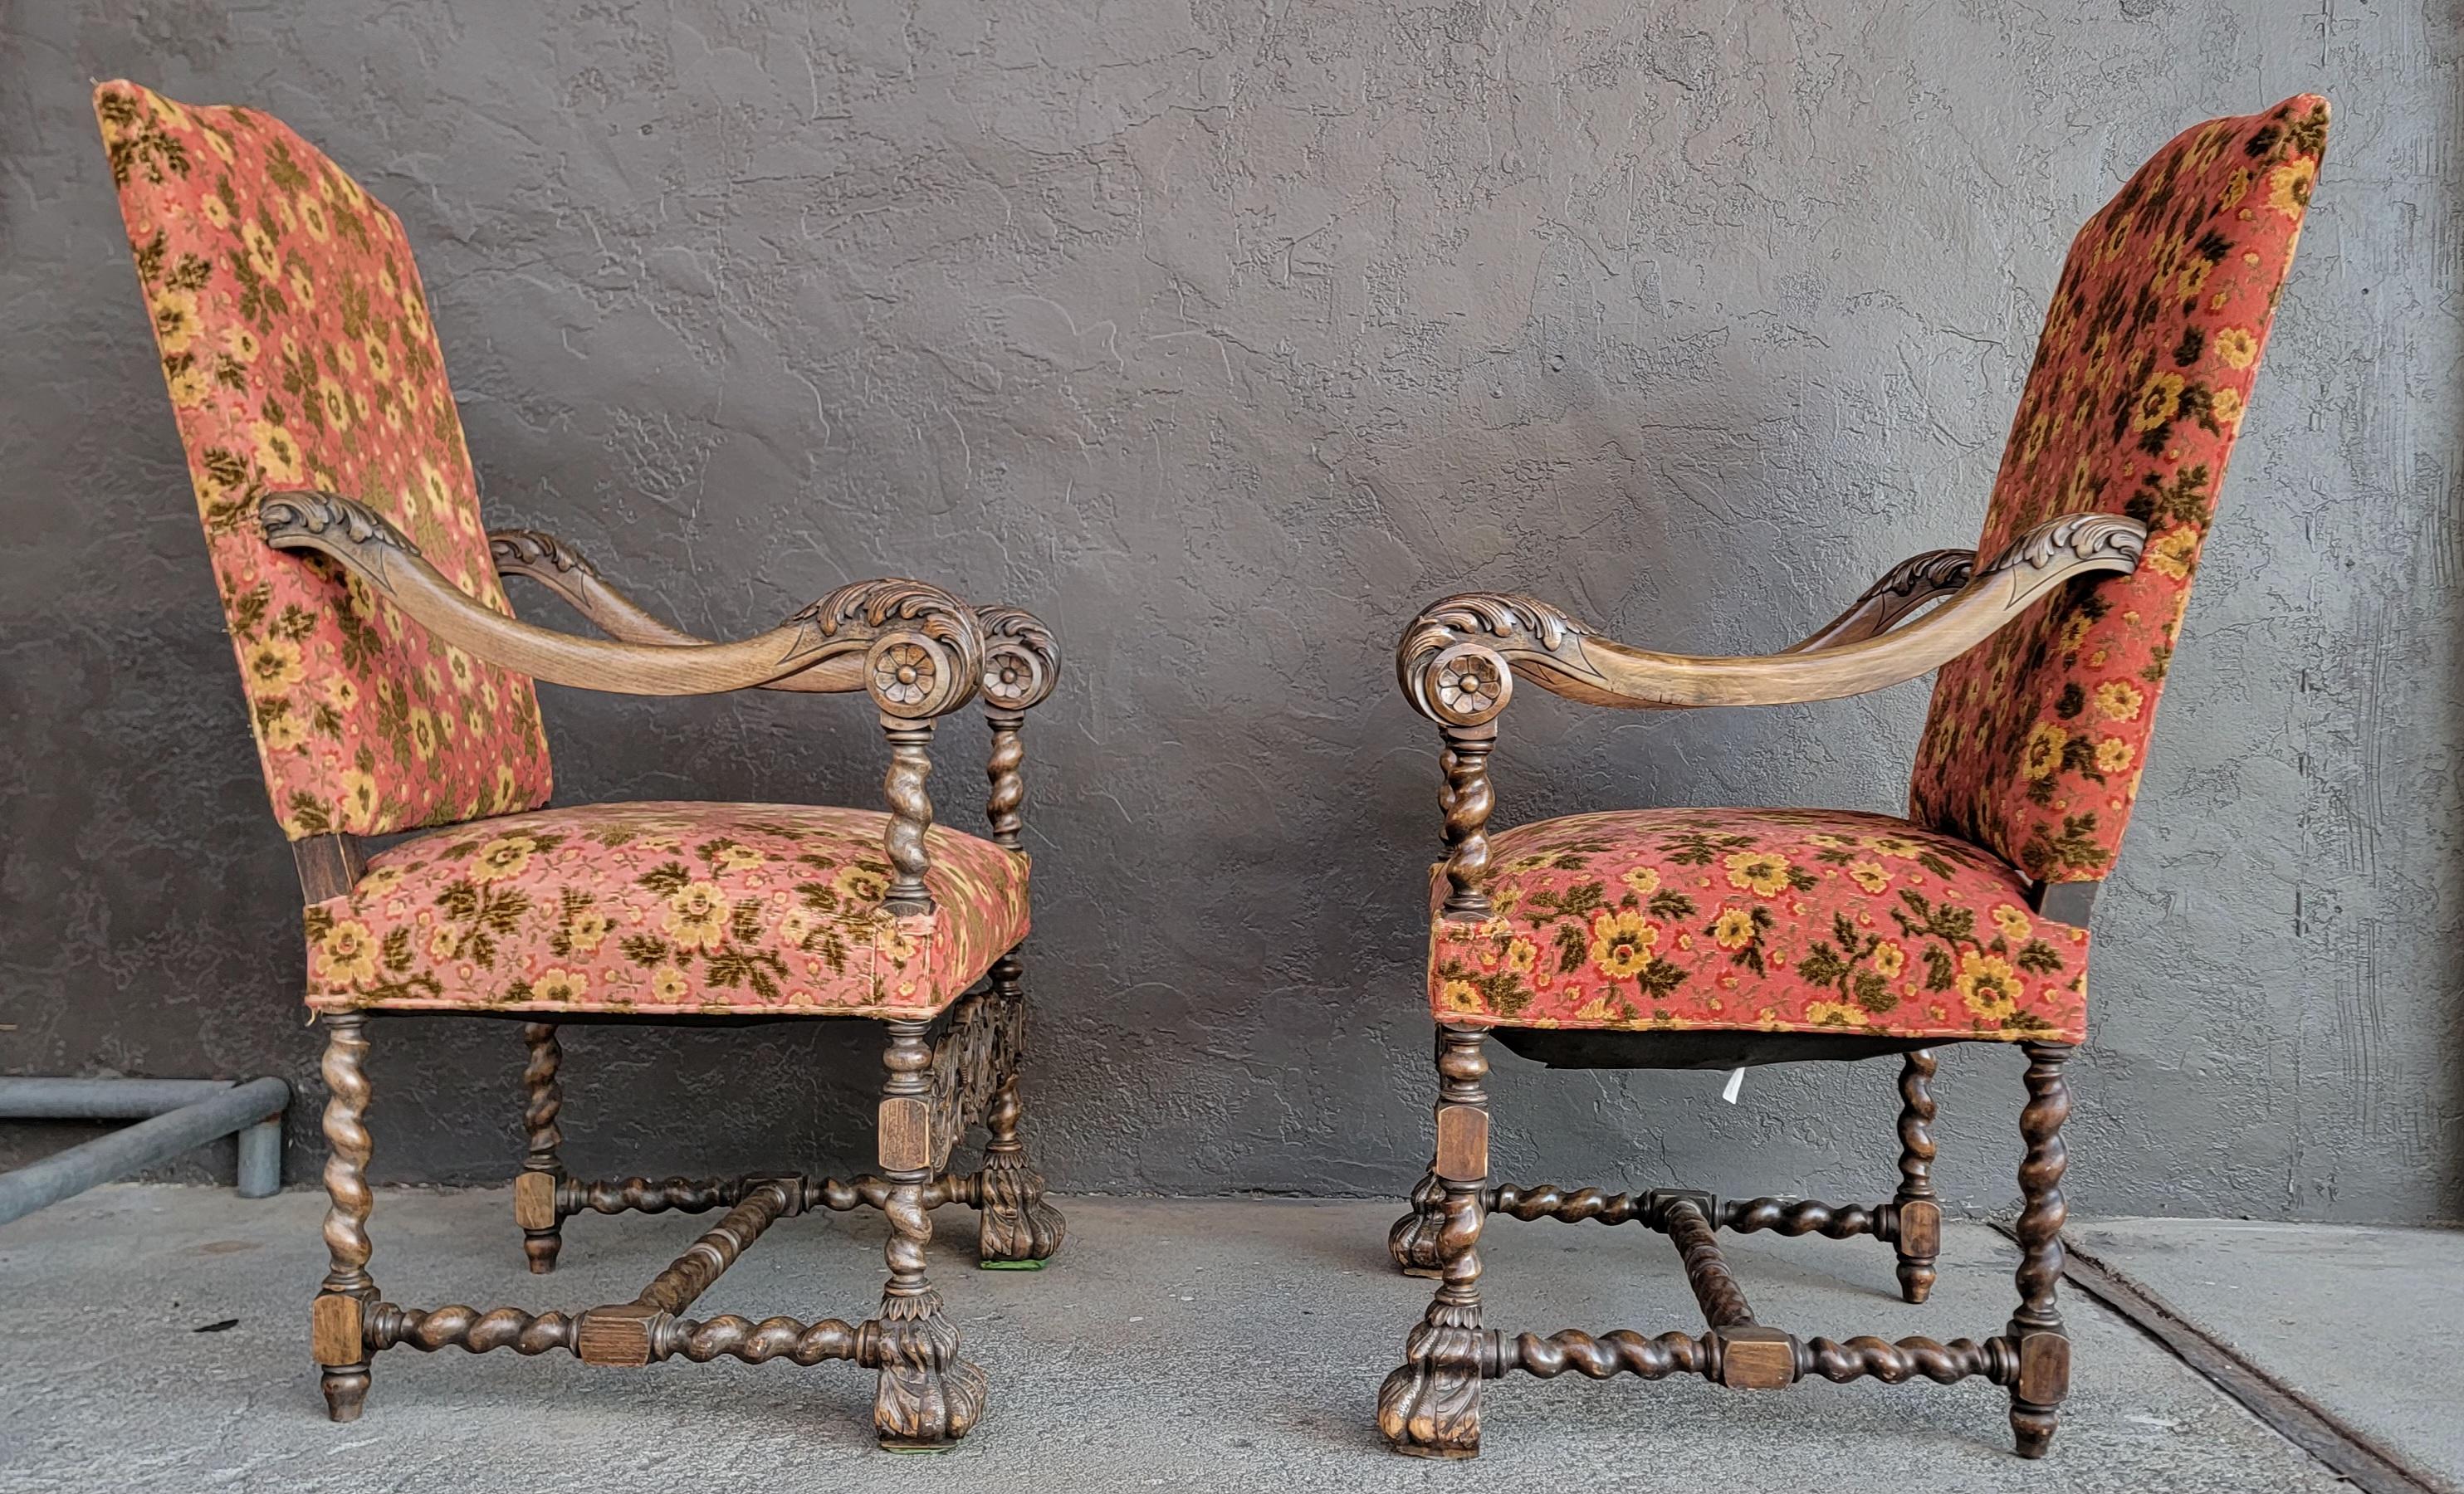 20th Century Gothic Revival Throne Chairs a Pair 1920's For Sale